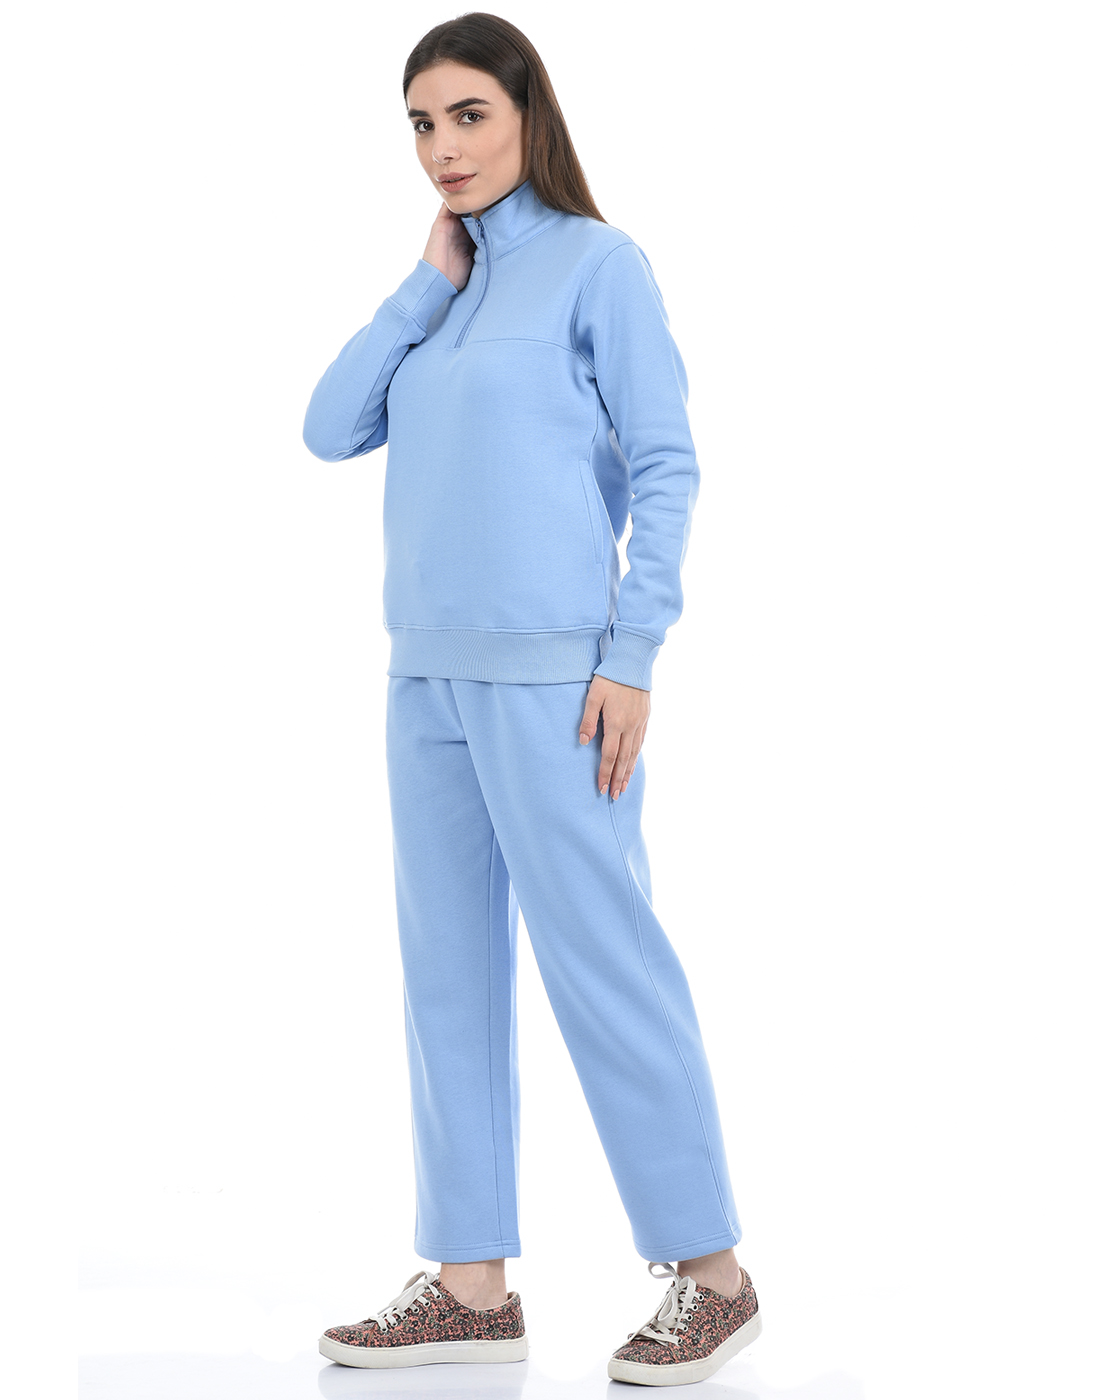 ONEWAY Women Solid Blue Track Suit